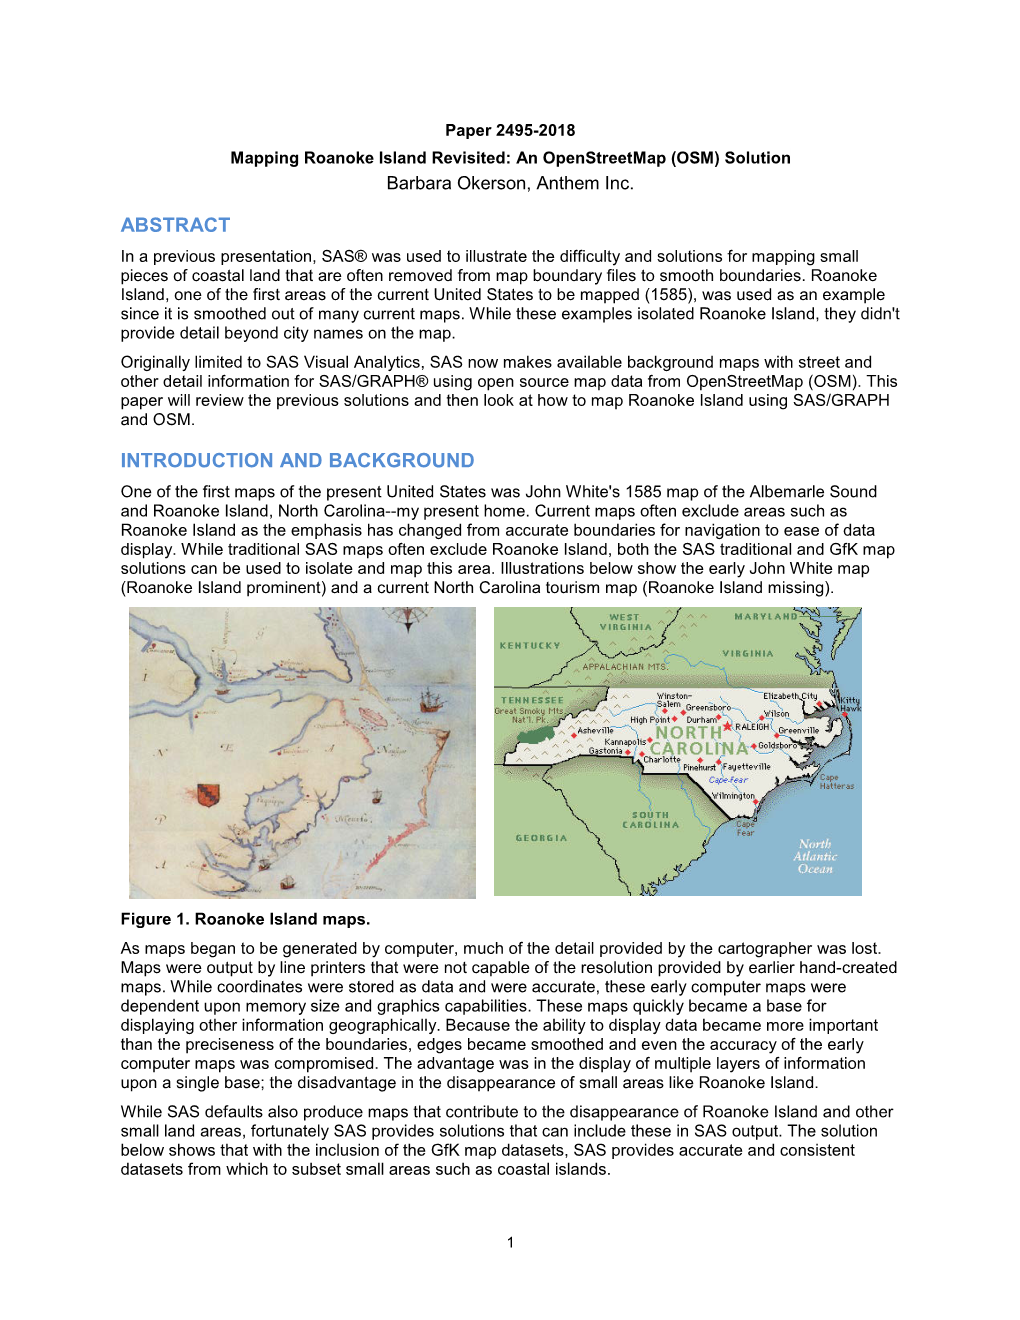 Mapping Roanoke Island Revisited: an Openstreetmap (OSM) Solution Barbara Okerson, Anthem Inc